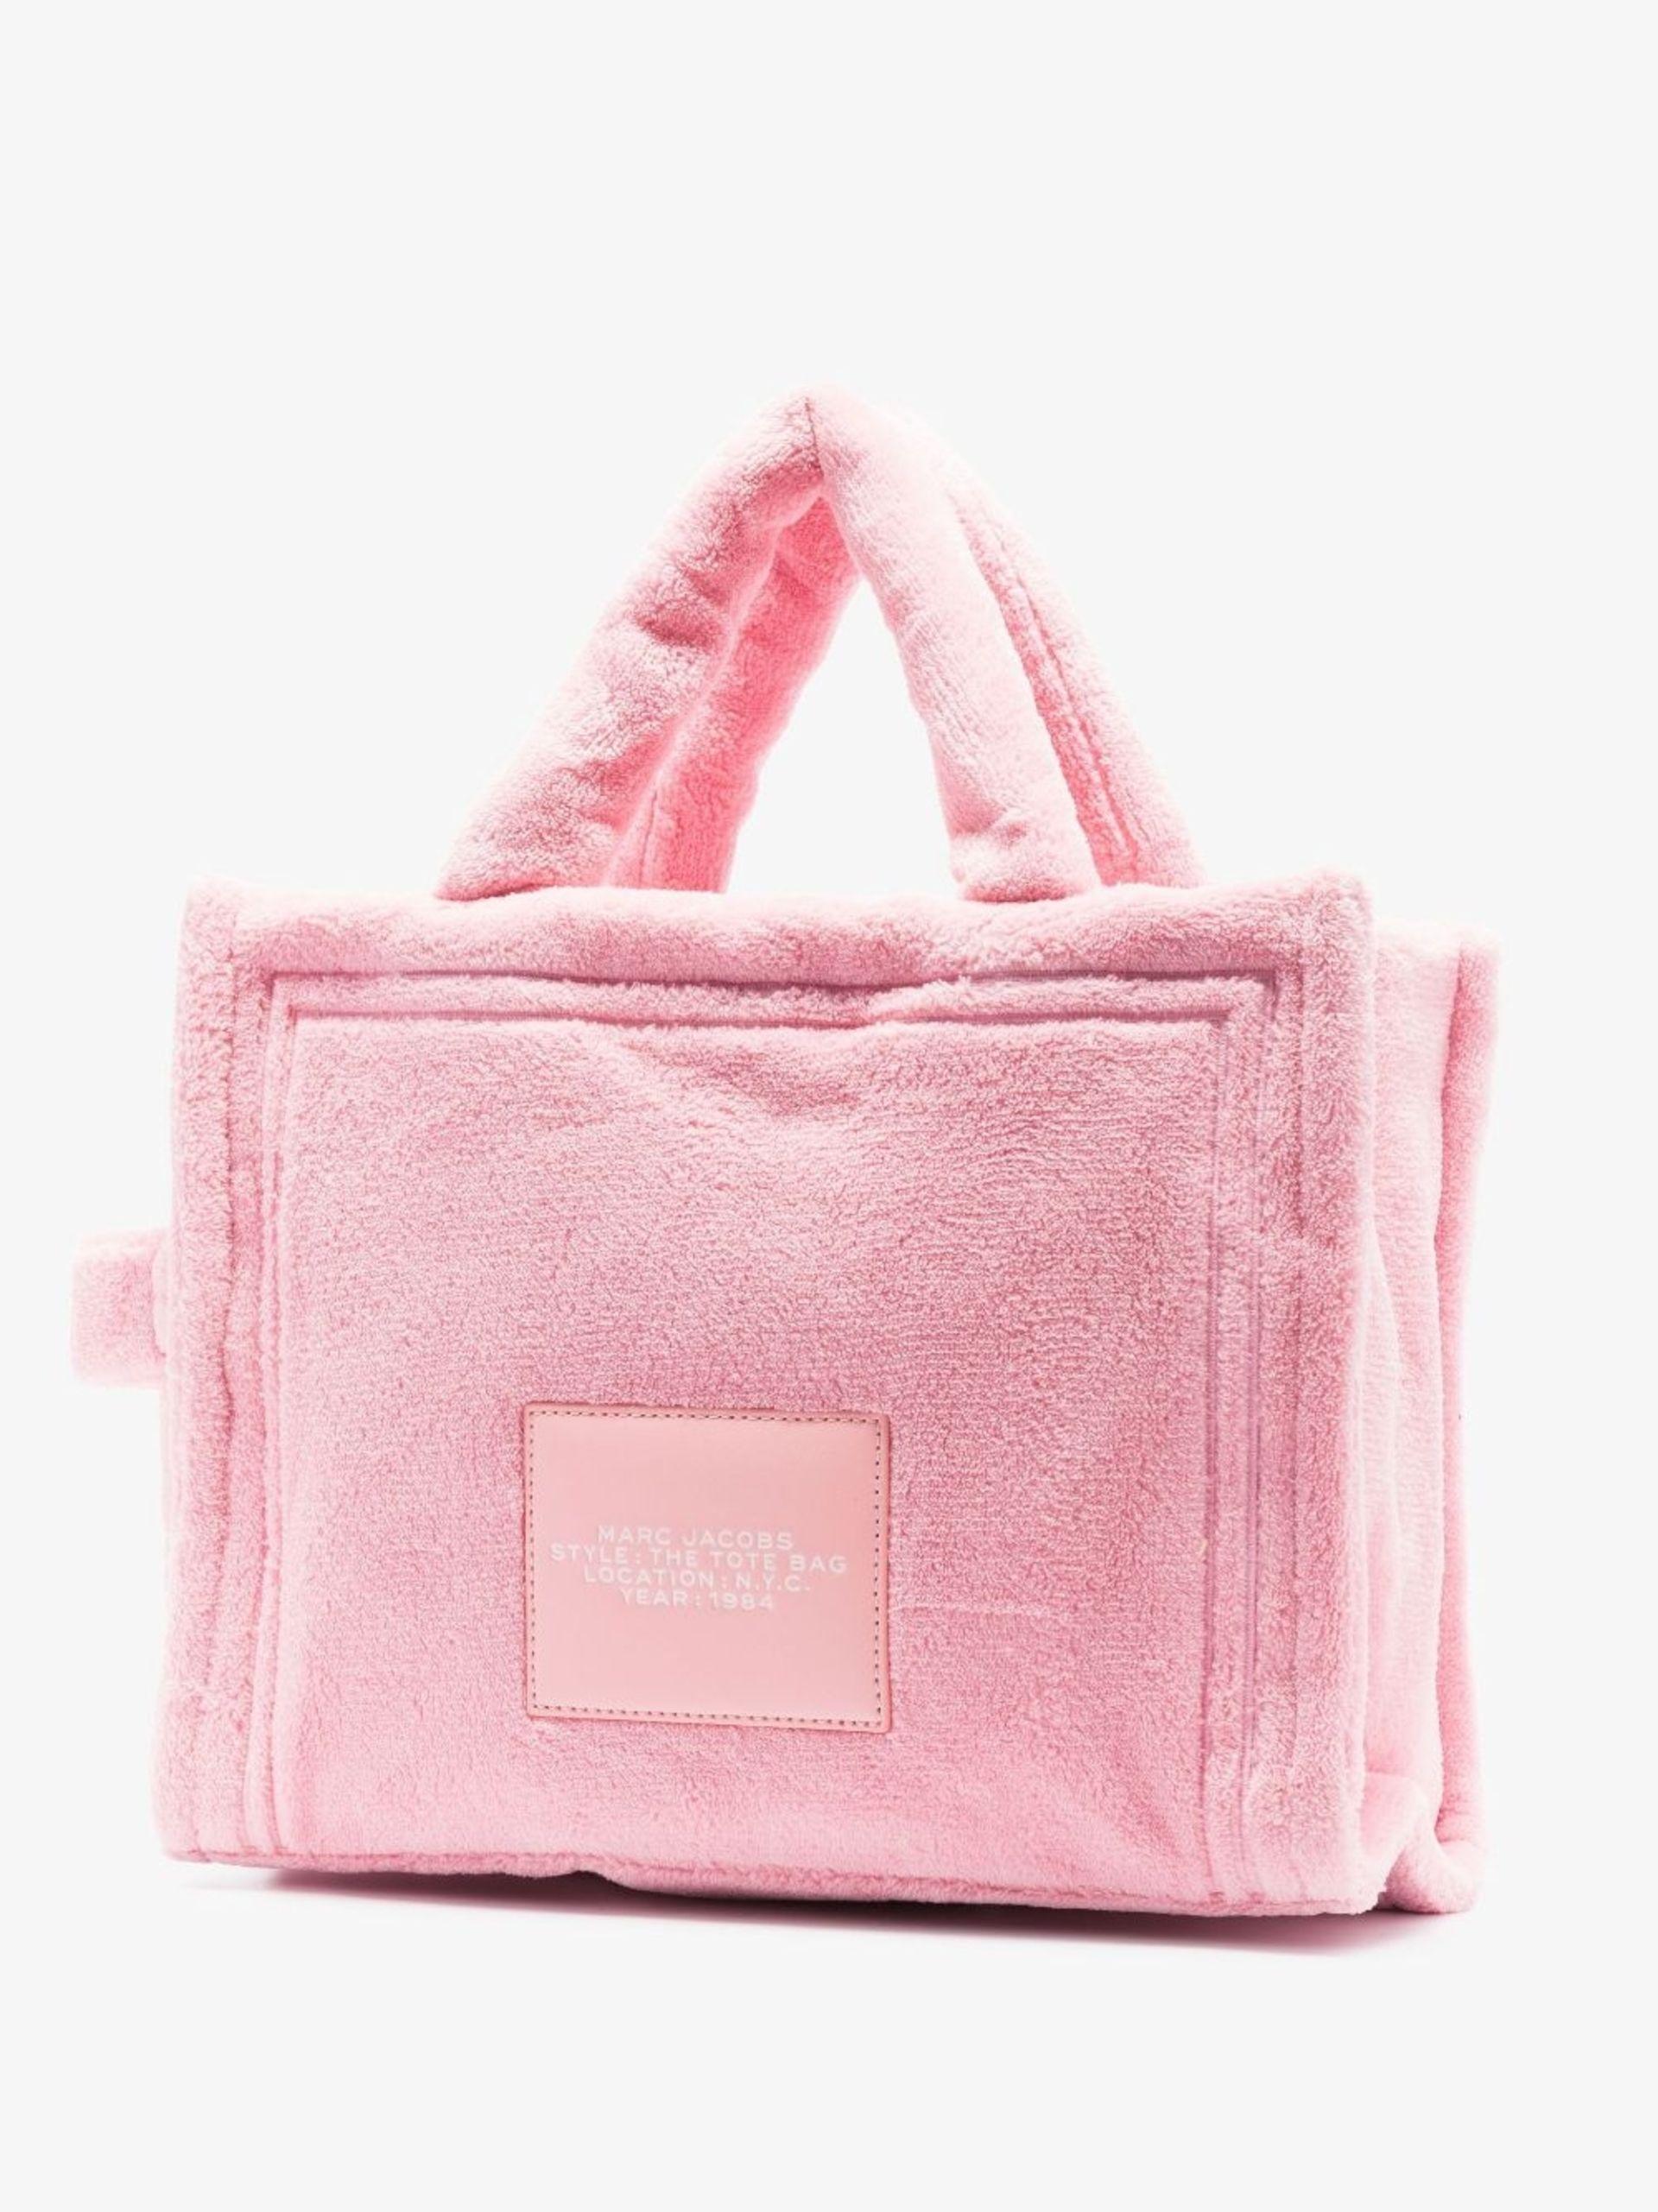 Marc Jacobs The Tote Small Terry Bag in Pink